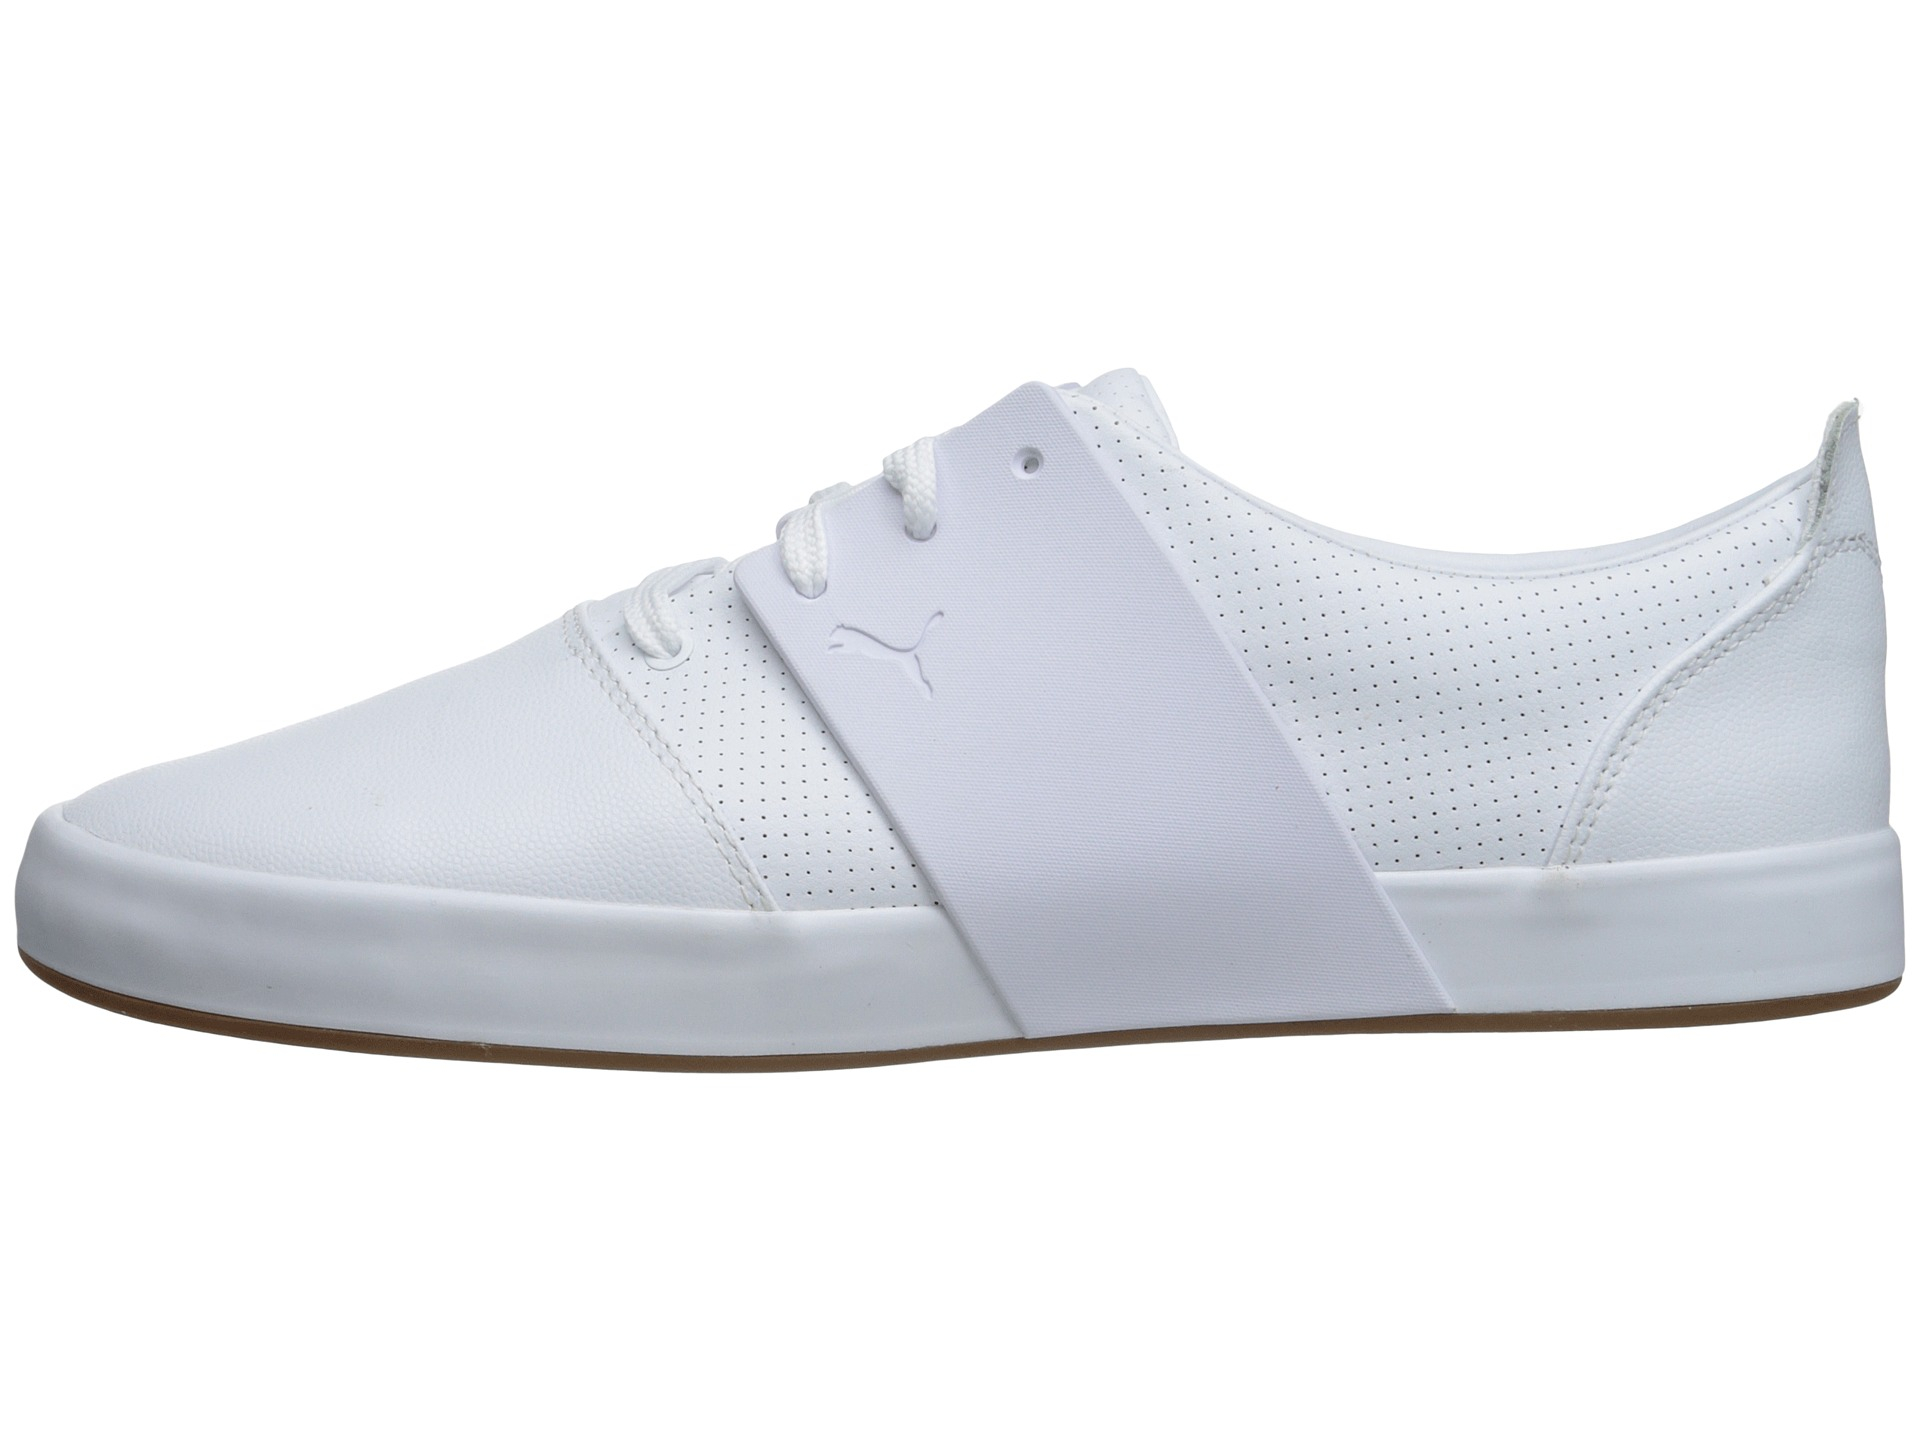 PUMA El Ace 3 Leather in White for Men - Lyst